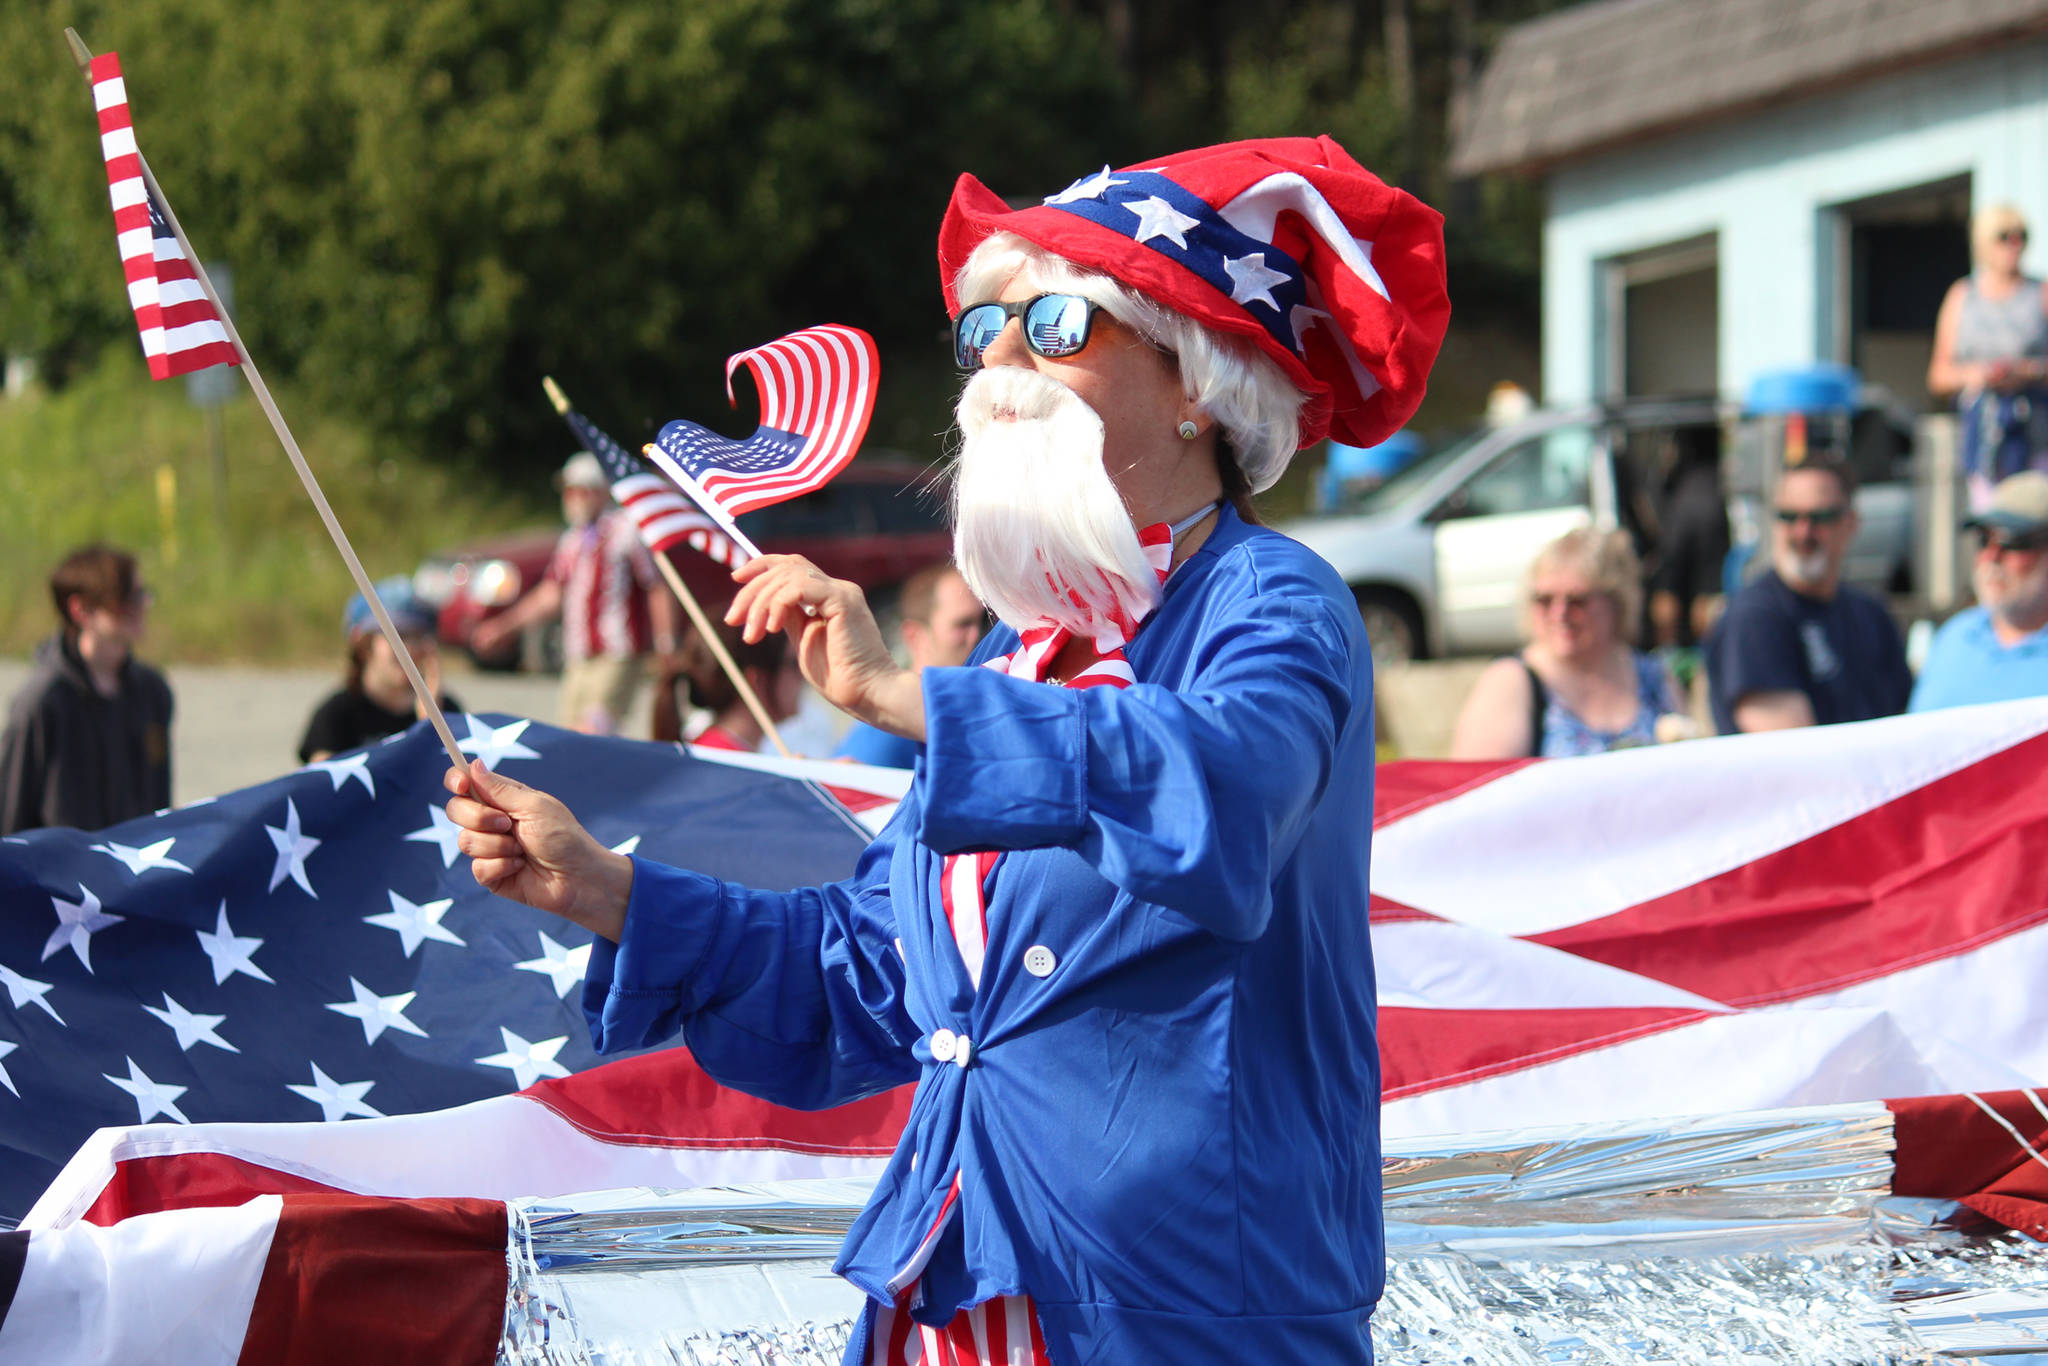 A member of the Homer Senior Citizens Center float marches in this year’s July Fourth parade on Thursday, July 4, 2019 on Pioneer Avenue in Homer, Alaska. (Photo by Megan Pacer/Homer News)